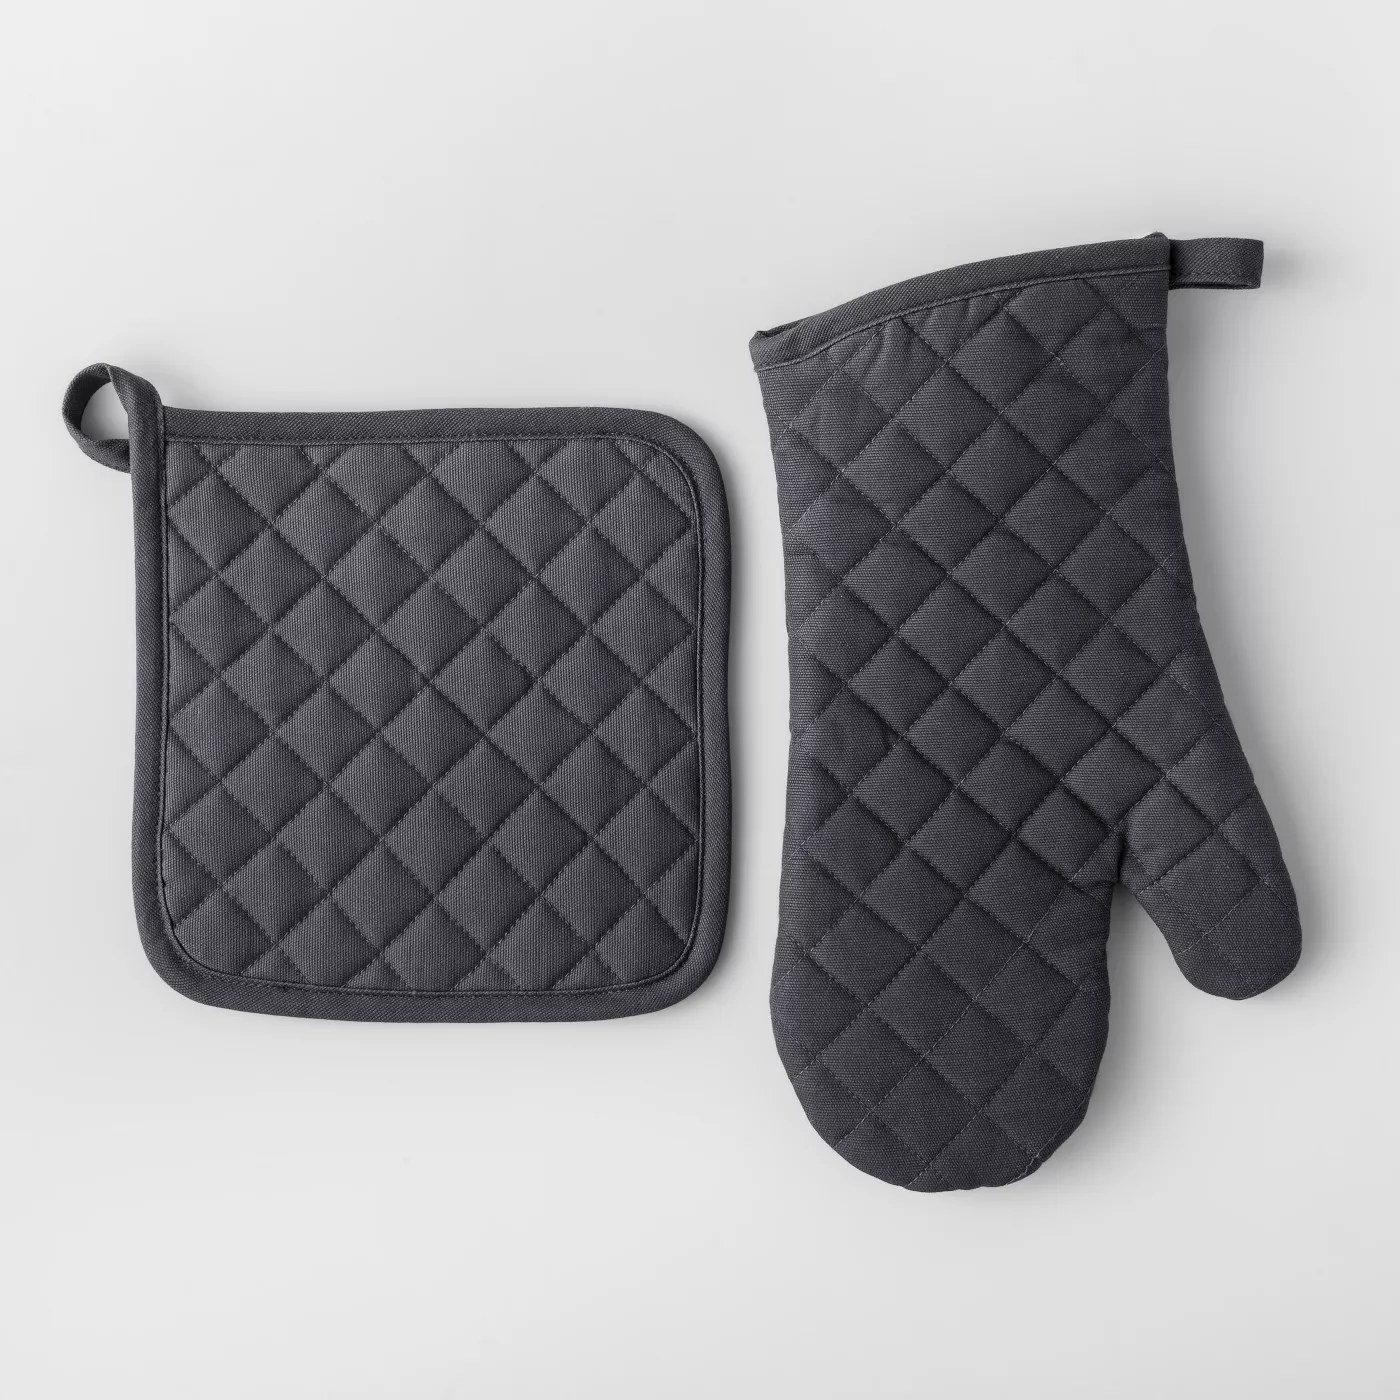 The quilted pot holder and oven mitt